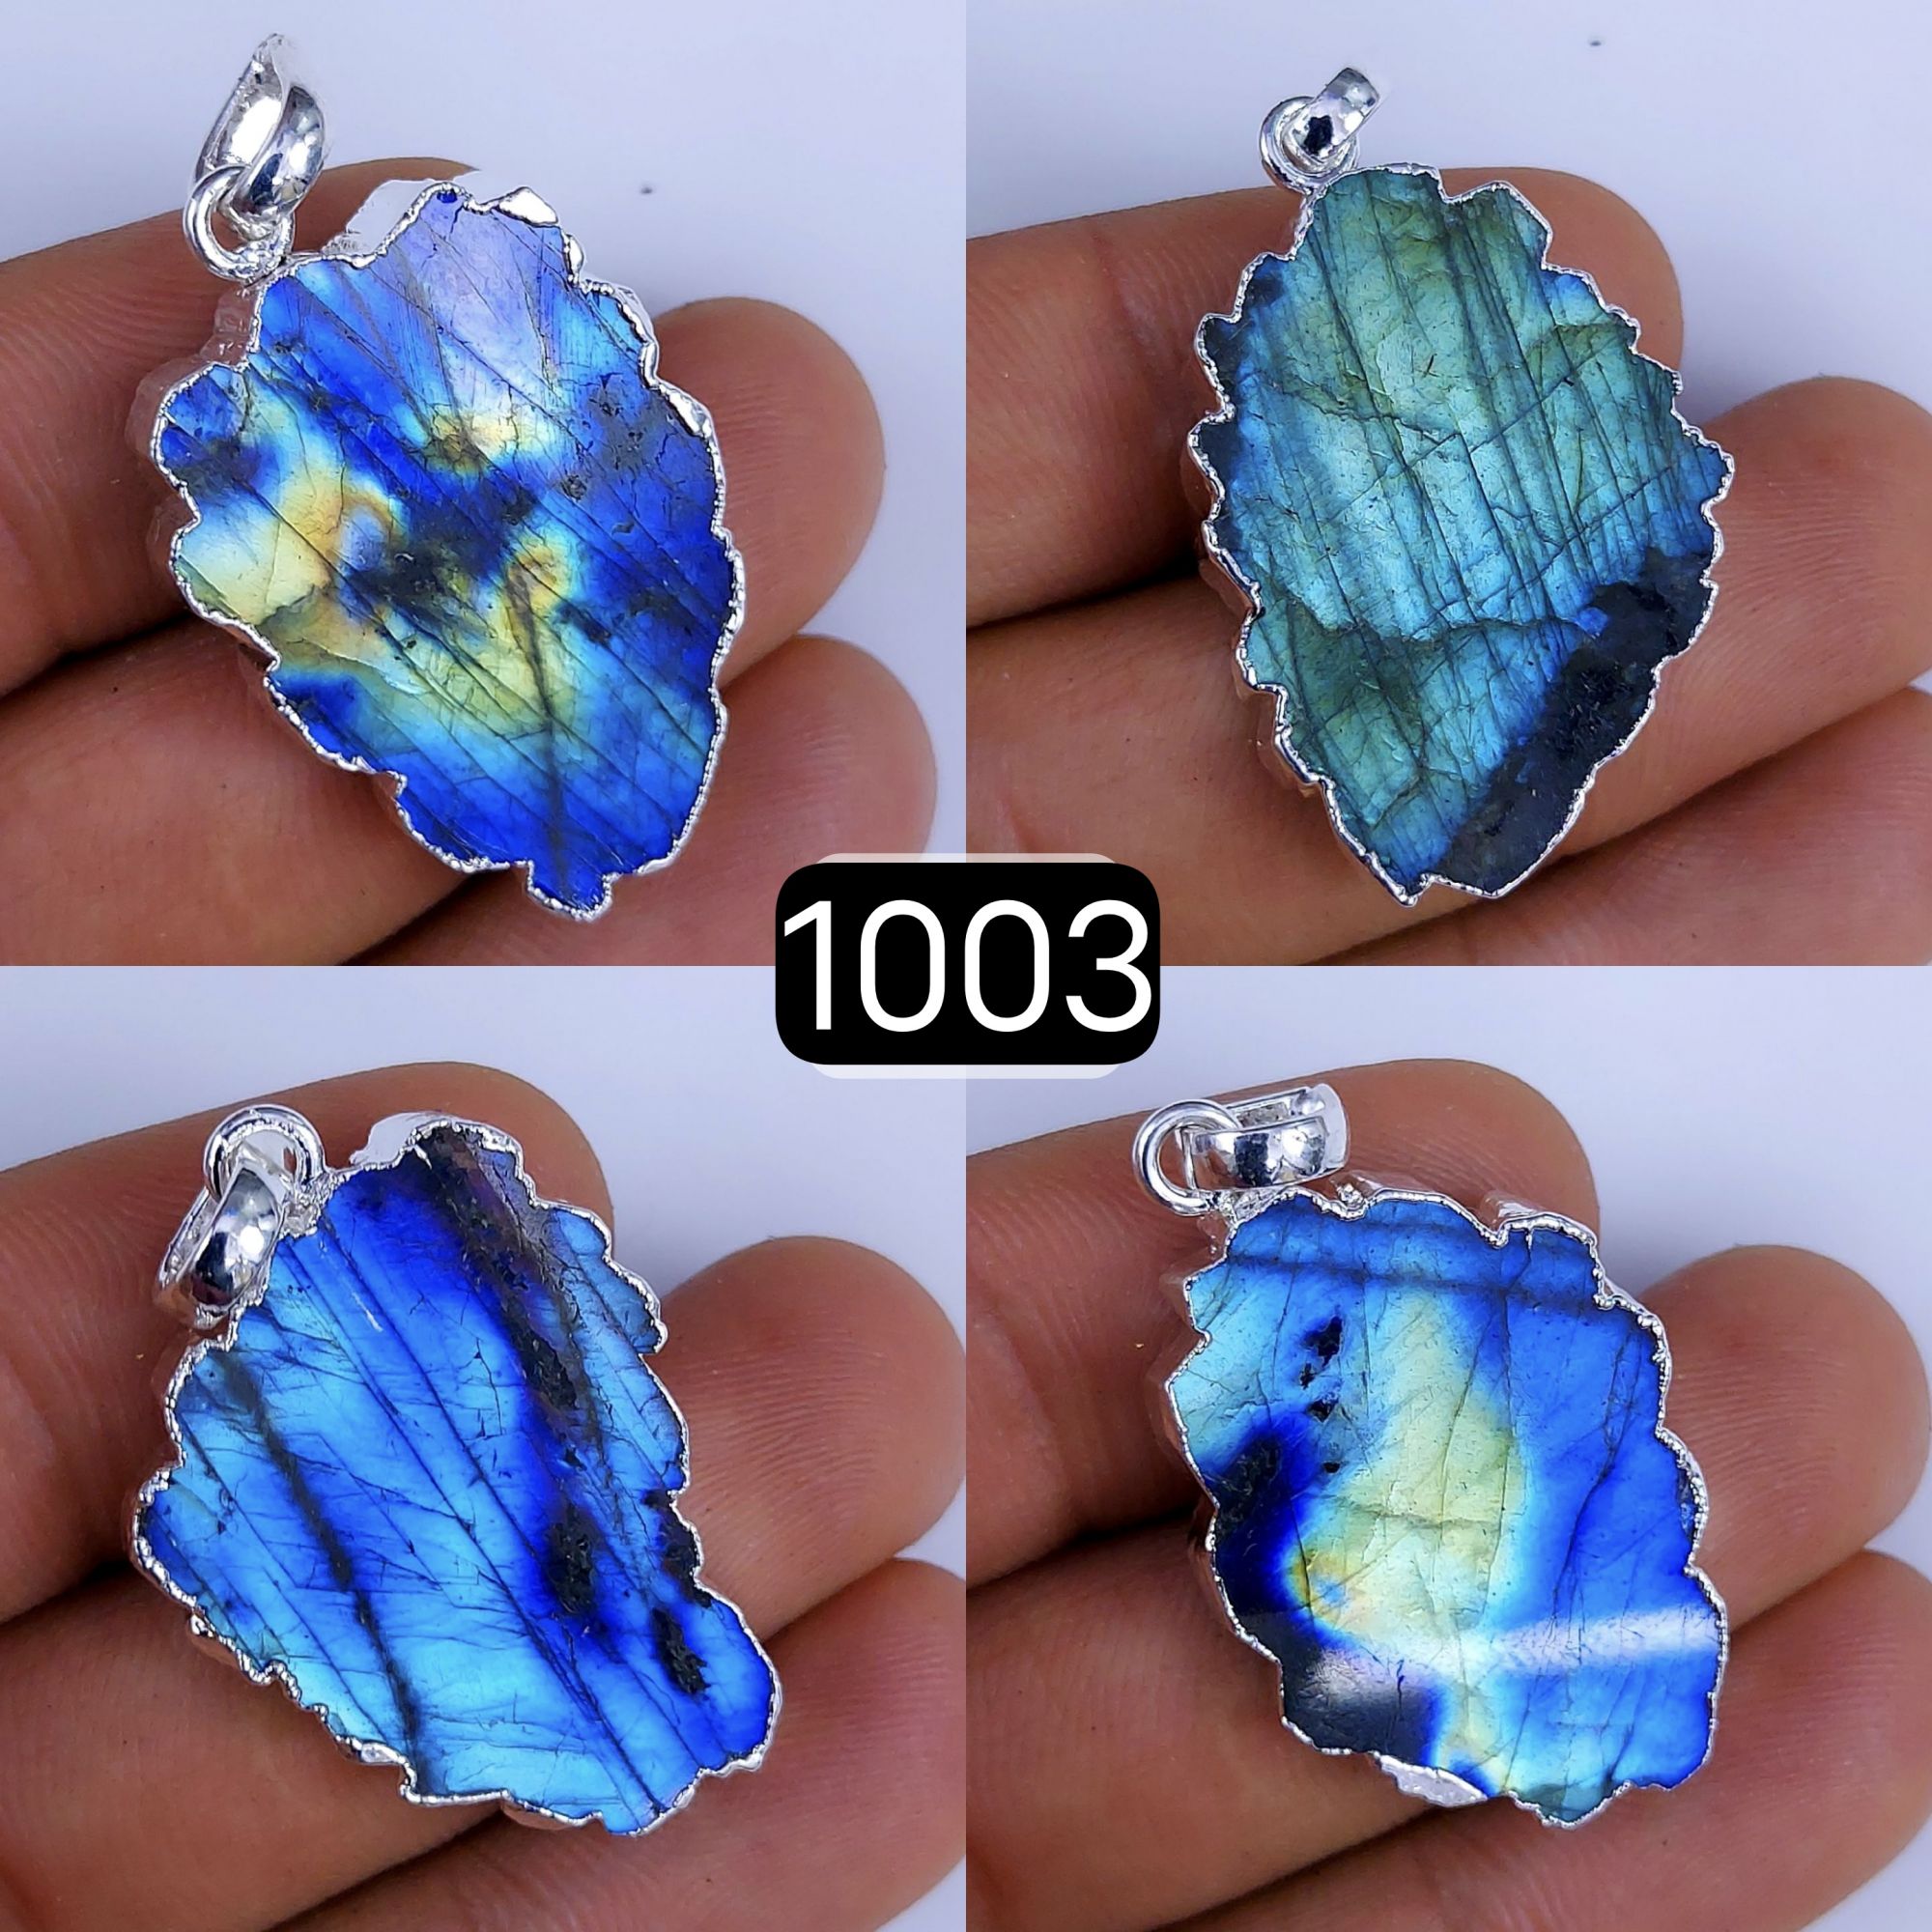 146Cts Natural Blue Labradorite Silver Electroplated Slice Pendant 32x18 22x12mm#1003